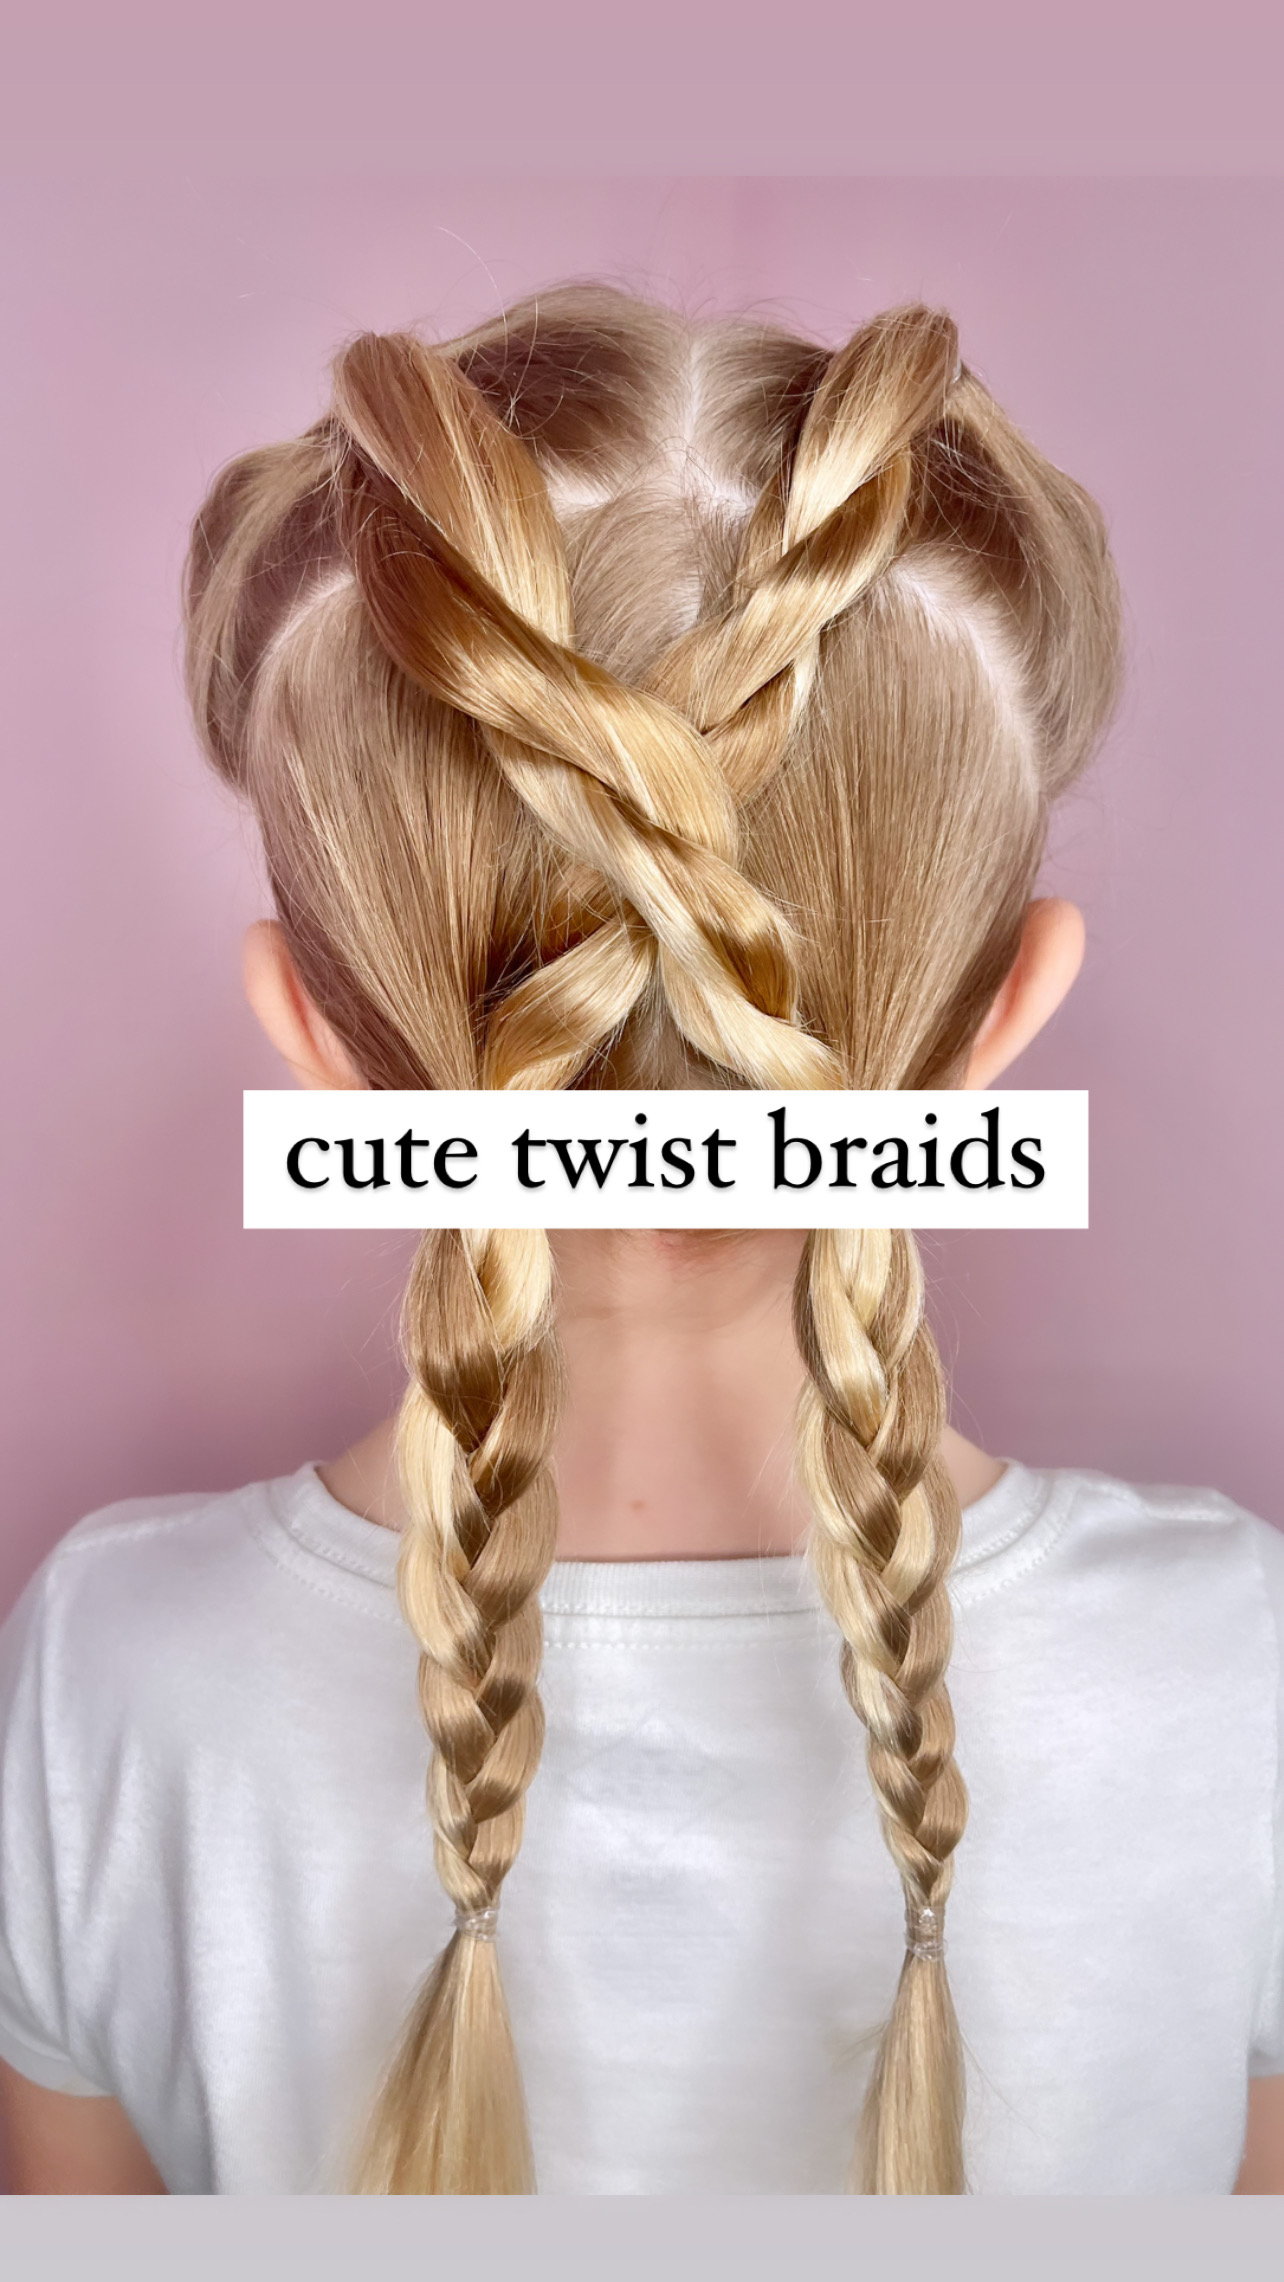 43 Fancy Braided Hairstyle Ideas from Pinterest ...